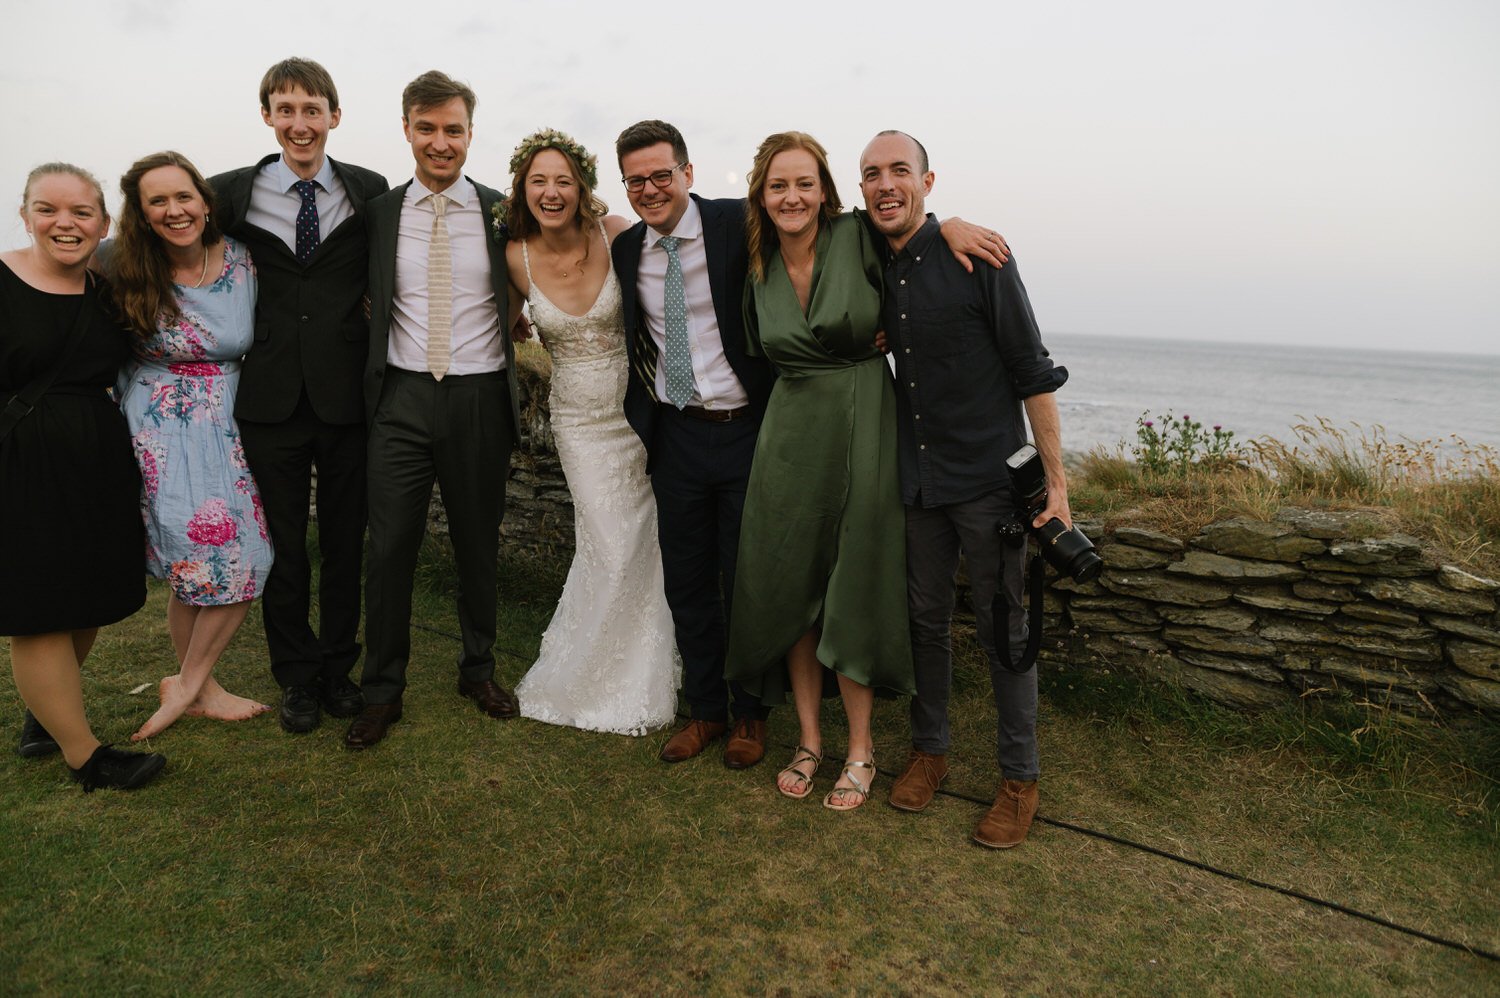 Prussia Cove Cornwall Wedding party photographer 9.jpg